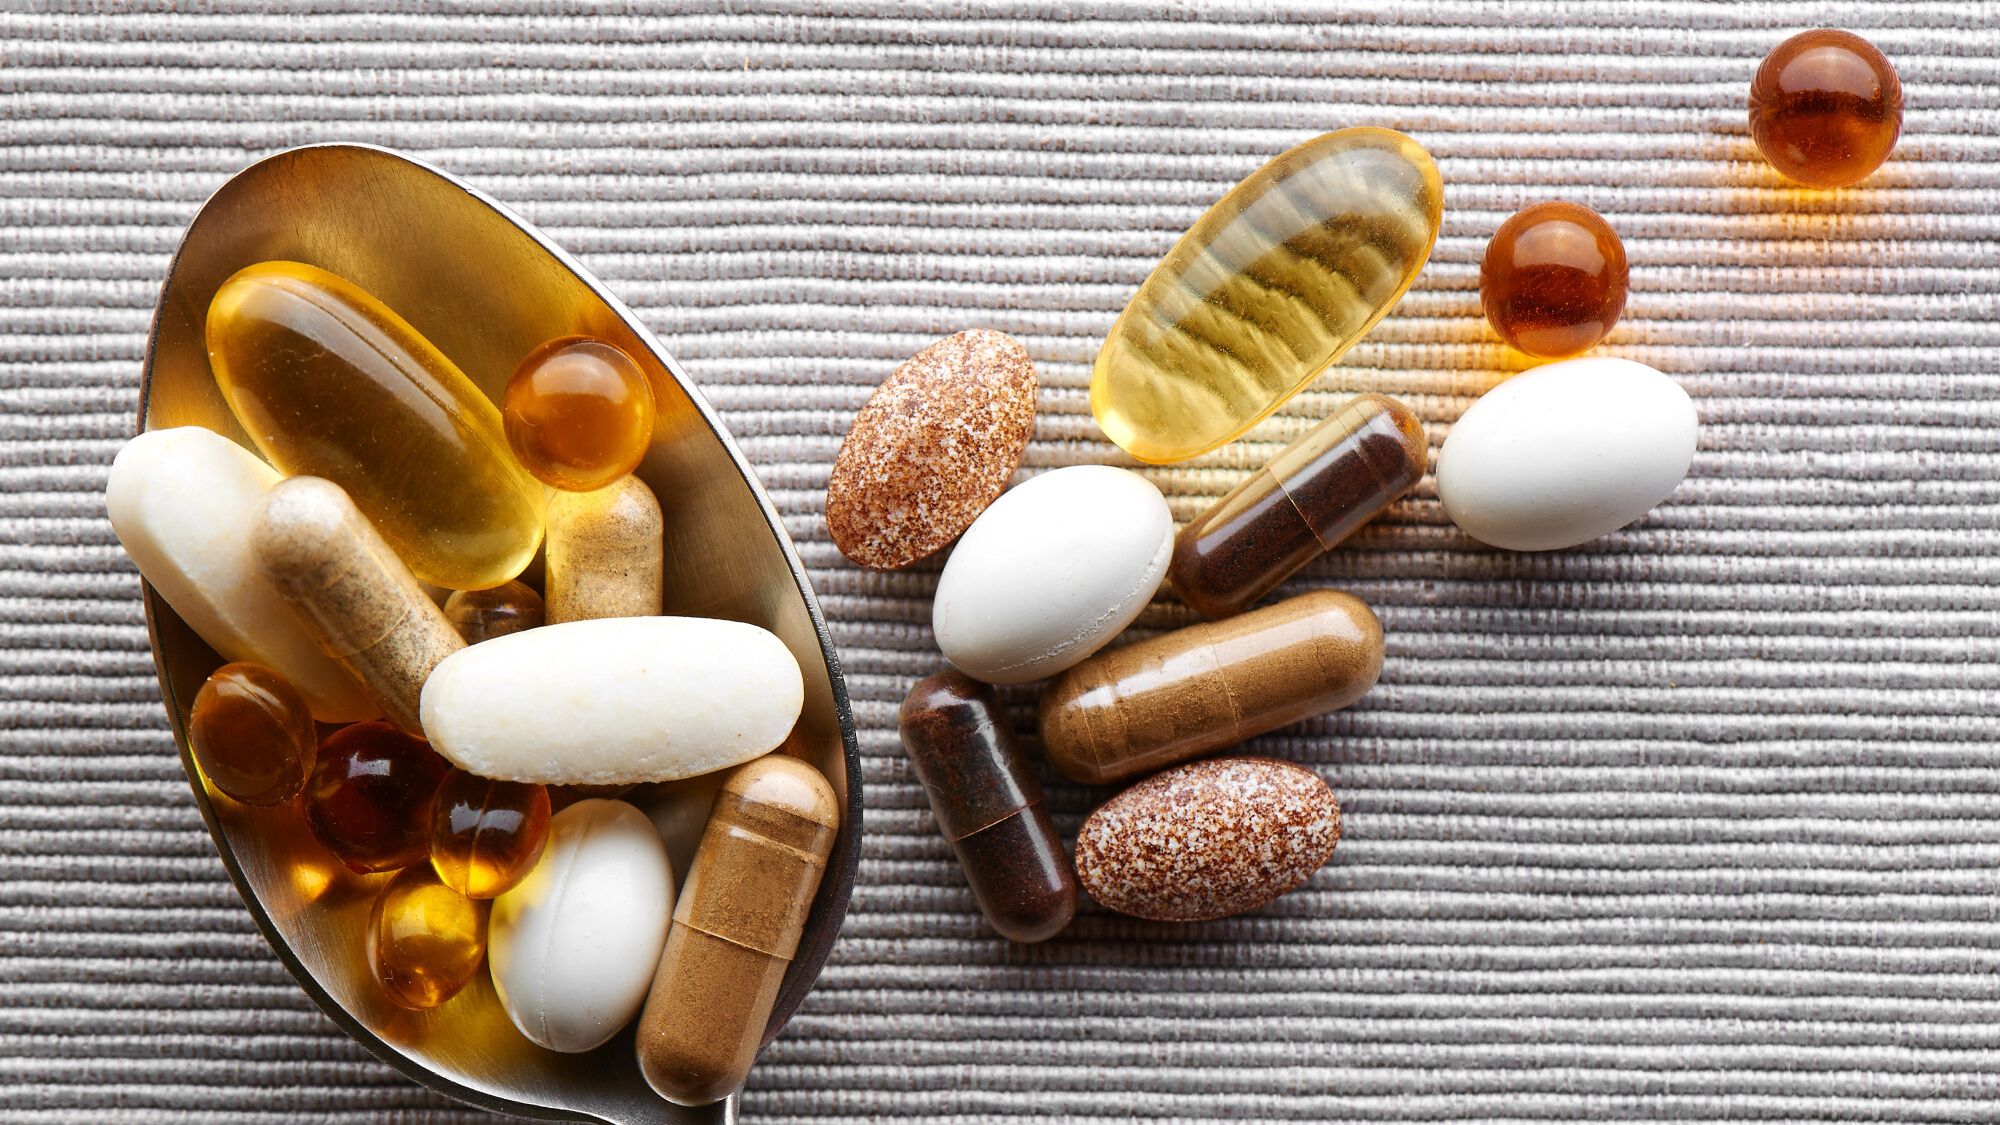 Food supplements: when are they useful?